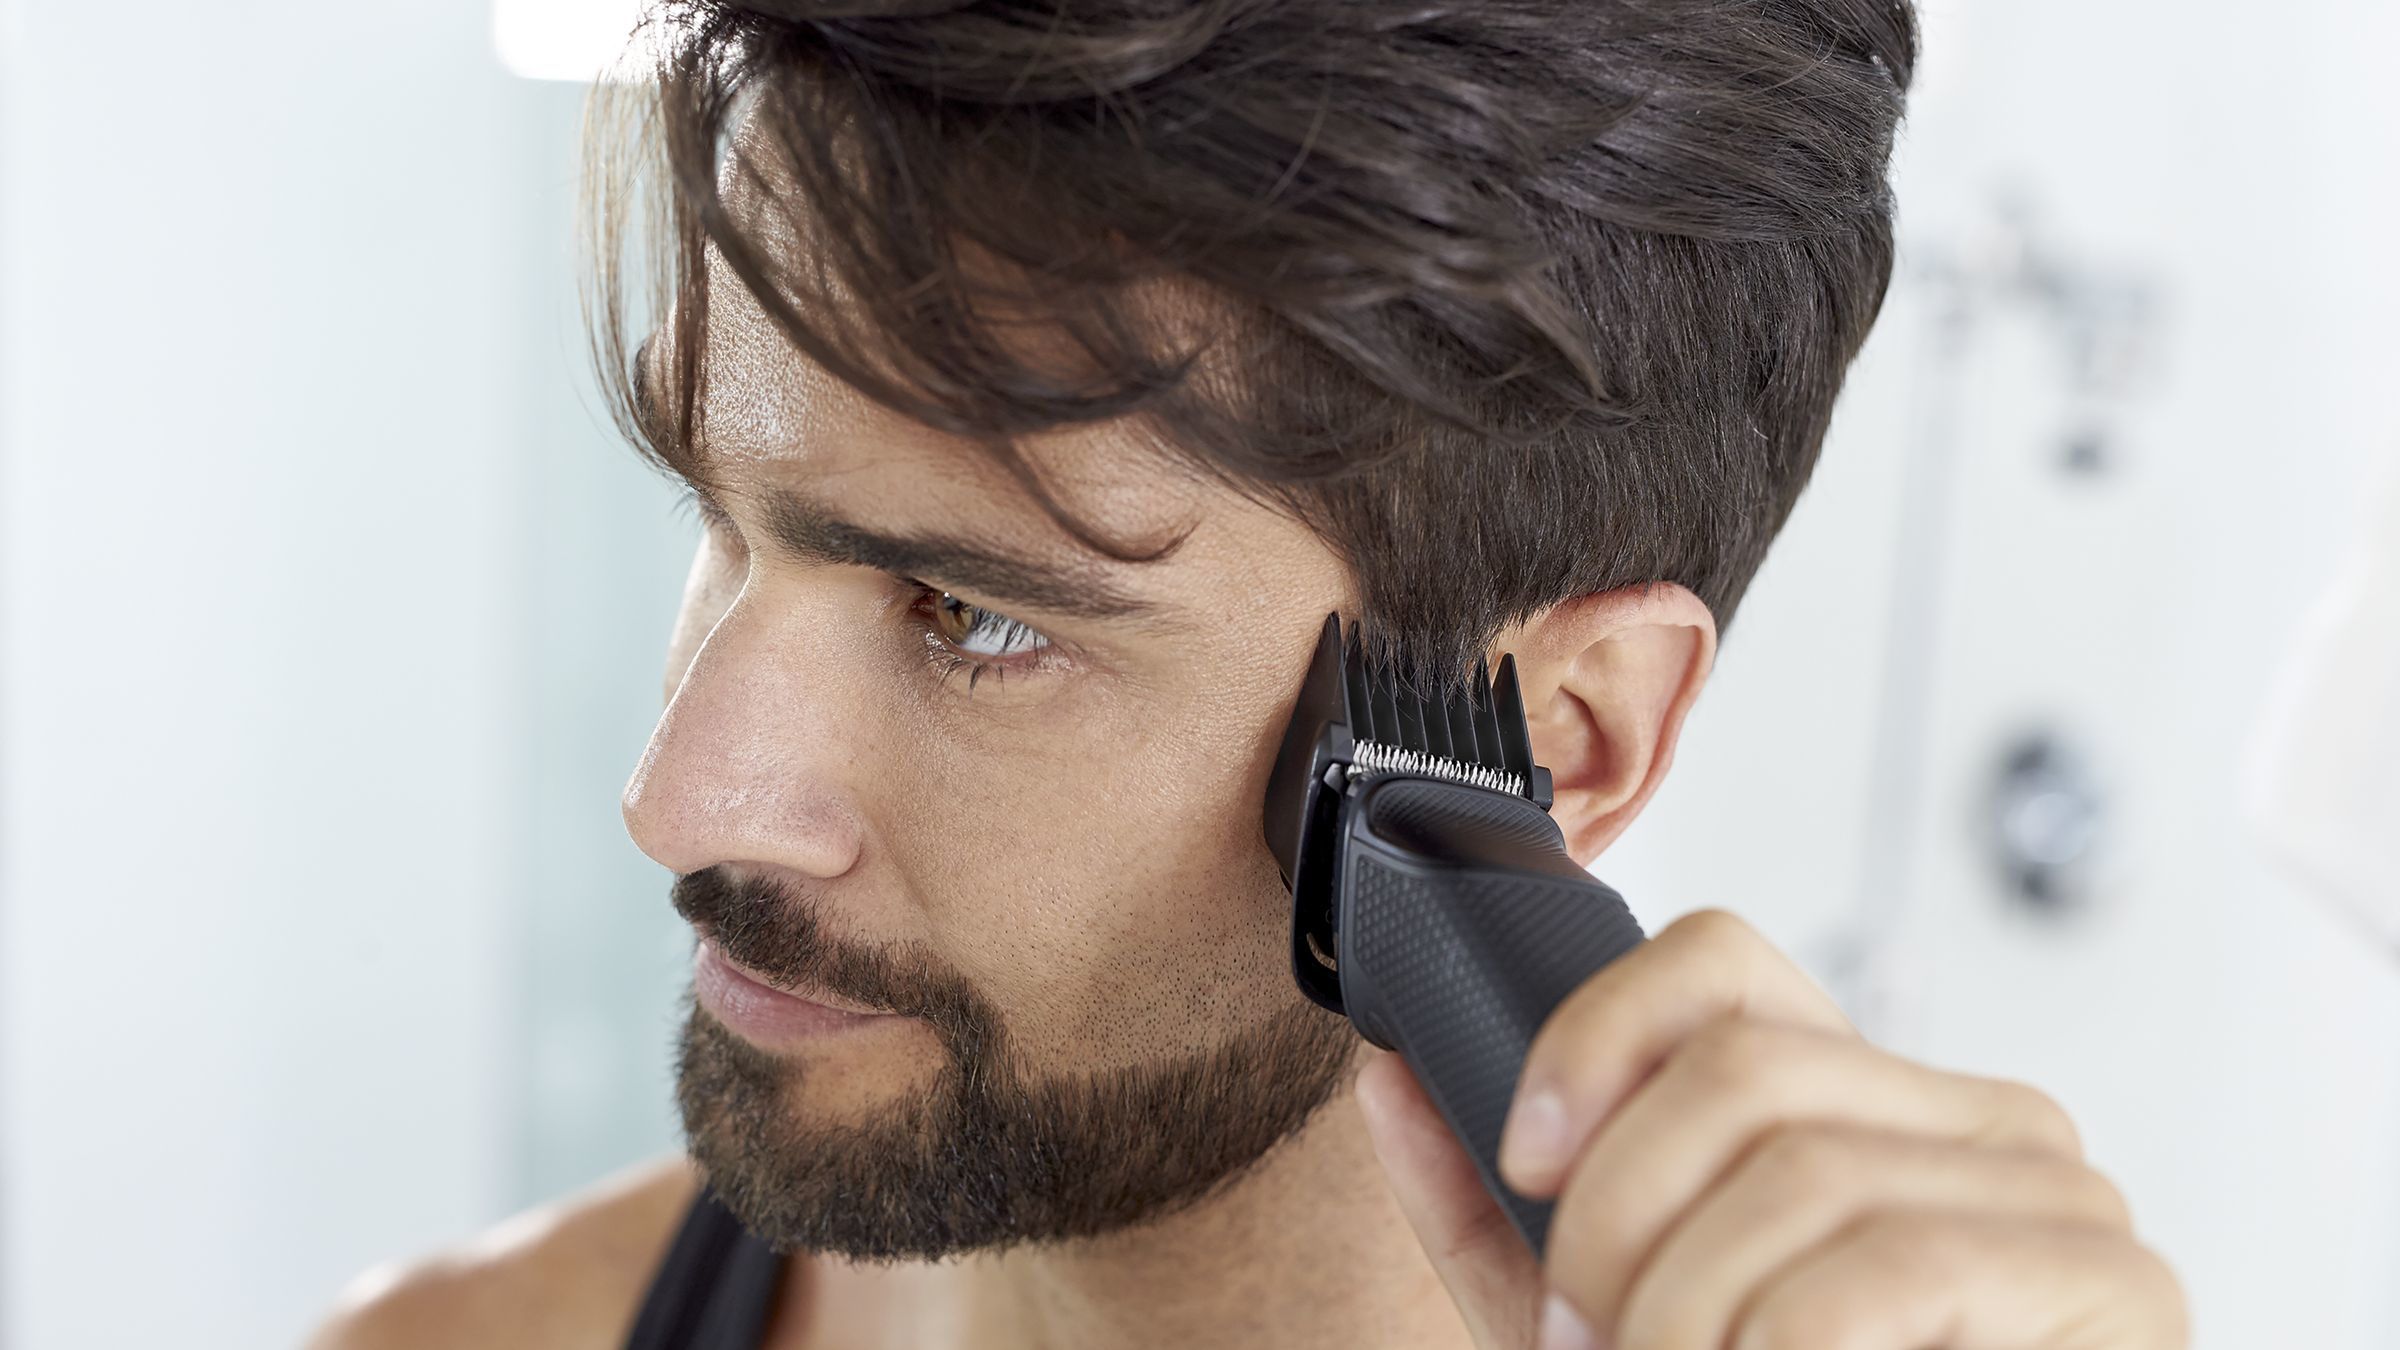 philips 11 in 1 body groomer and hair clipper kit